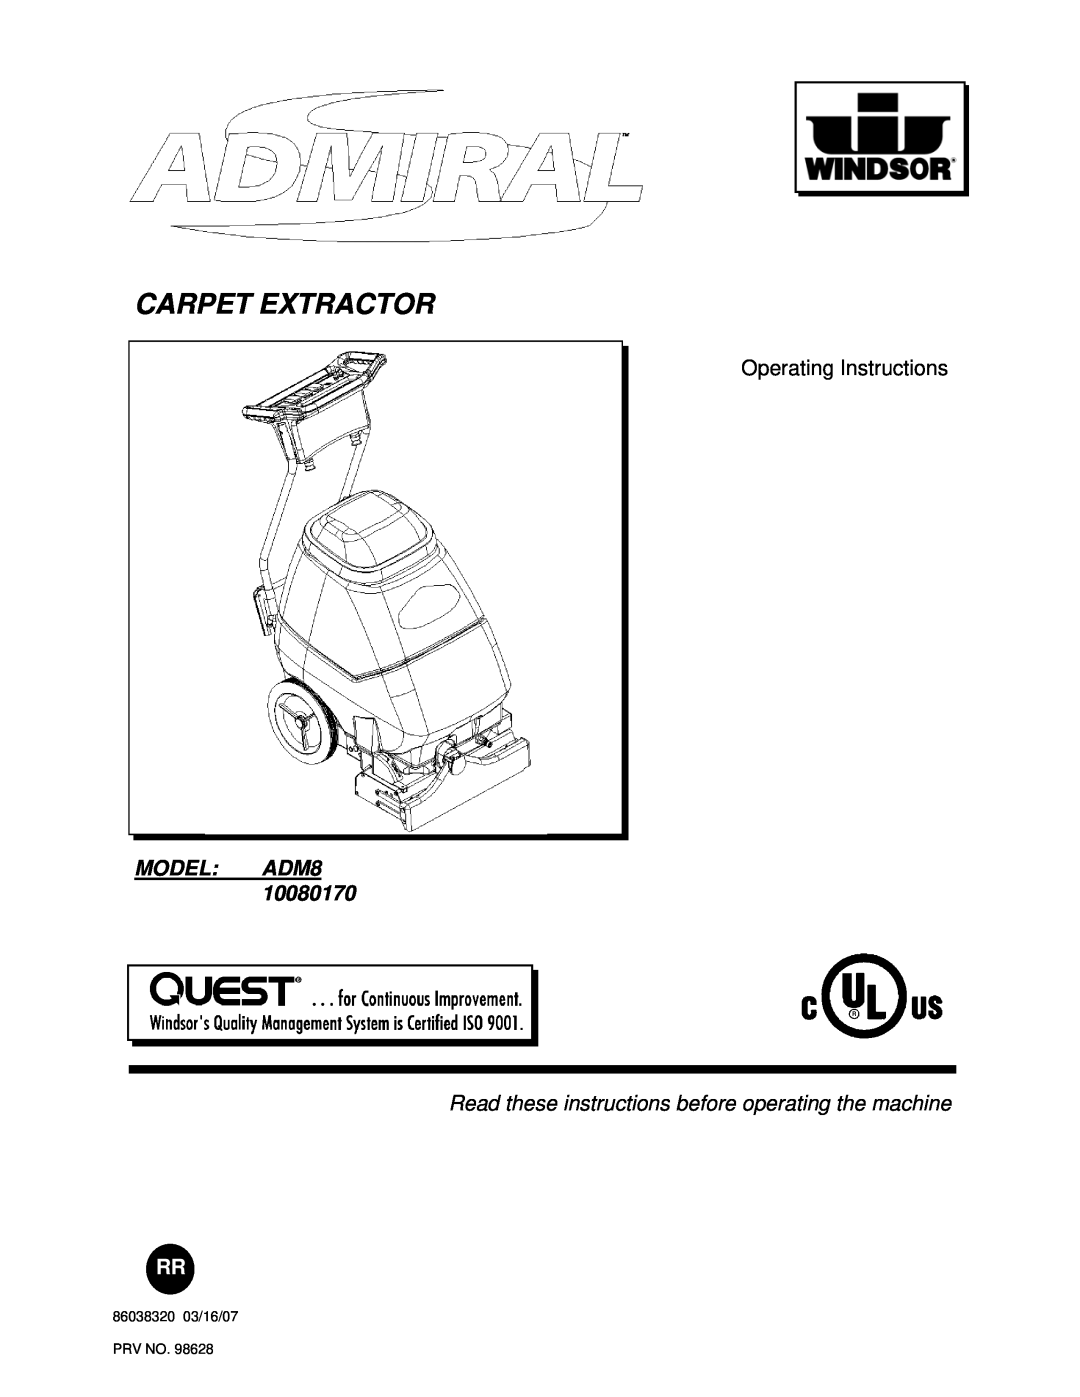 Windsor operating instructions Operating Instructions, MODEL ADM810080170, Carpet Extractor, 86038320 03/16/07 PRV NO 